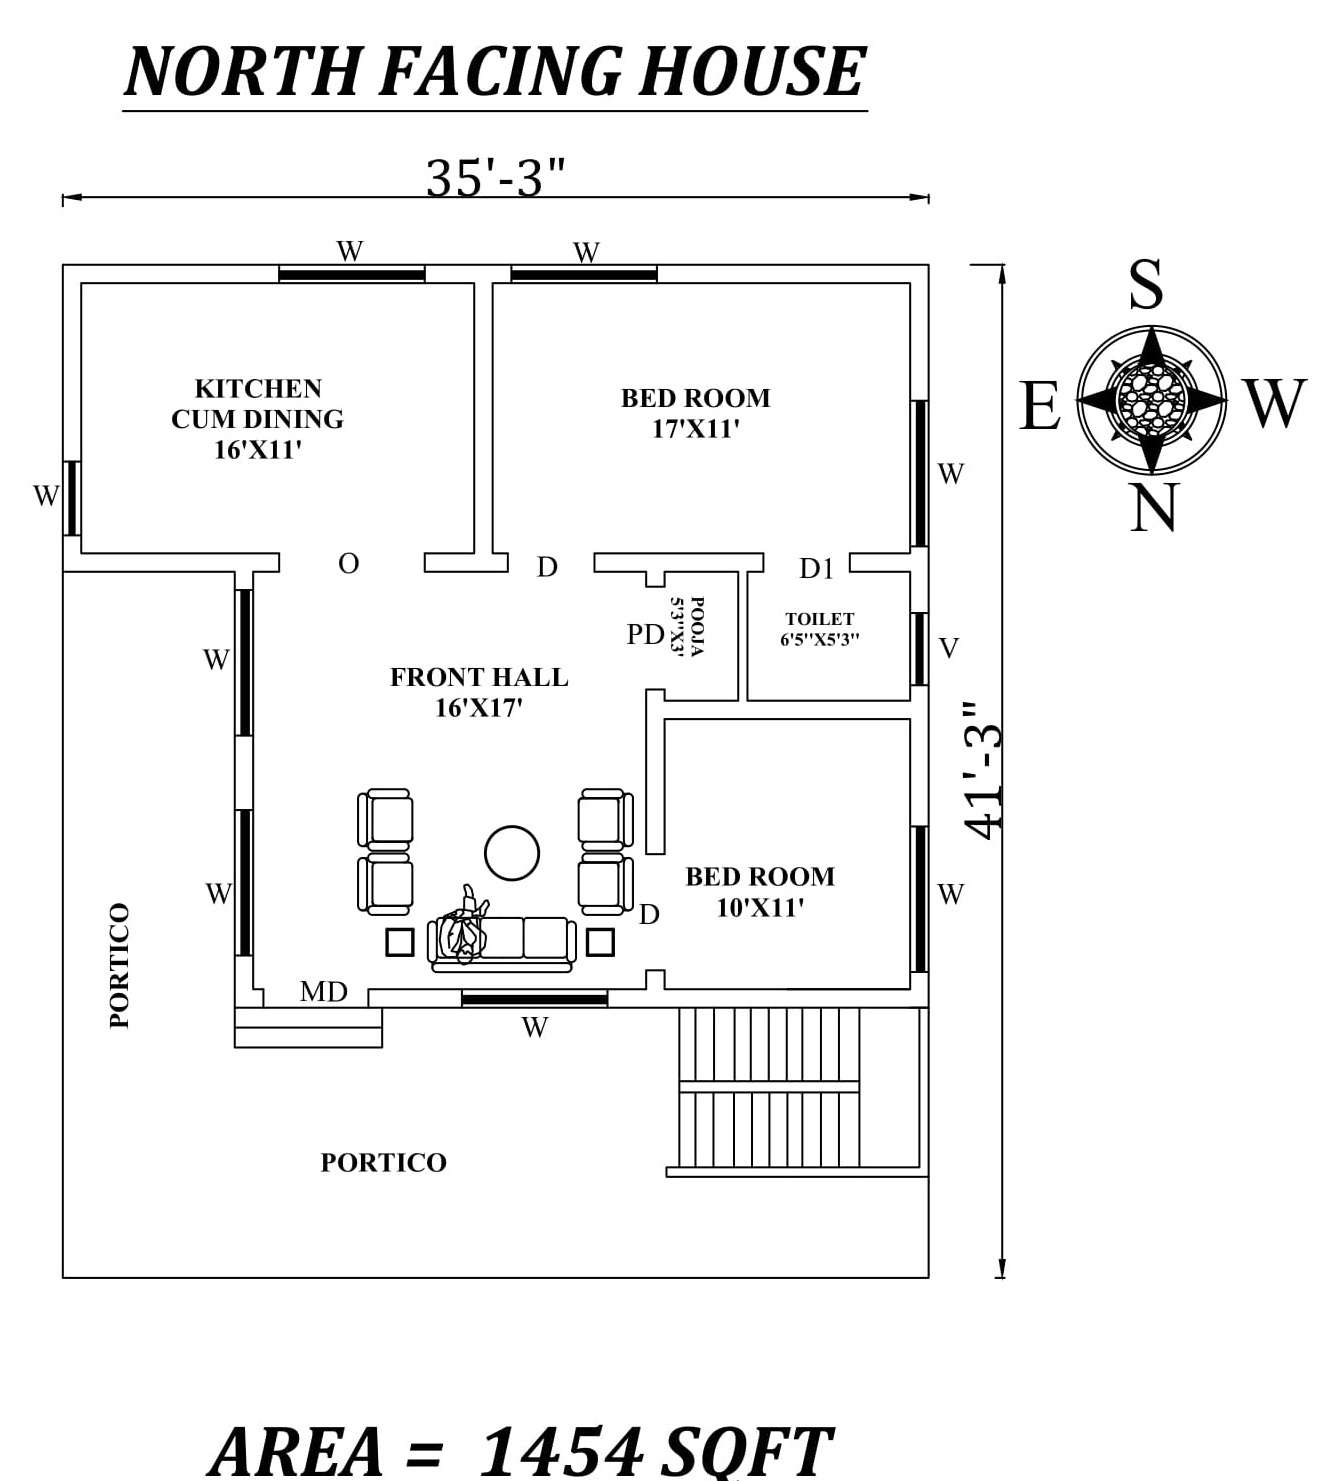 35'3"X41'3" Amazing North facing 2bhk house plan as per